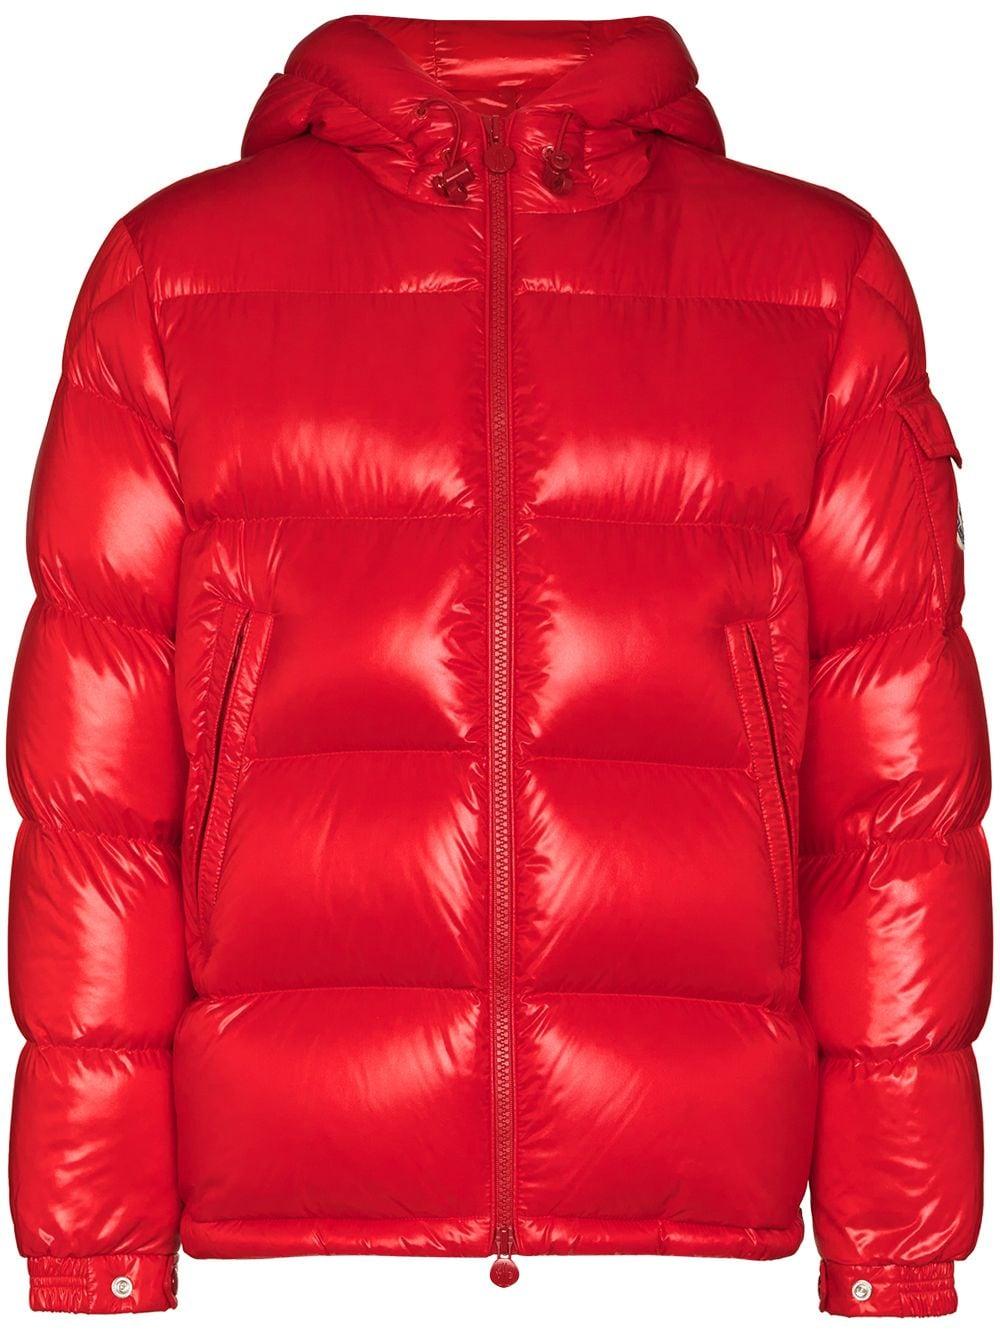 Moncler Synthetic Puffer Down Jacket in Red for Men - Save 48% - Lyst